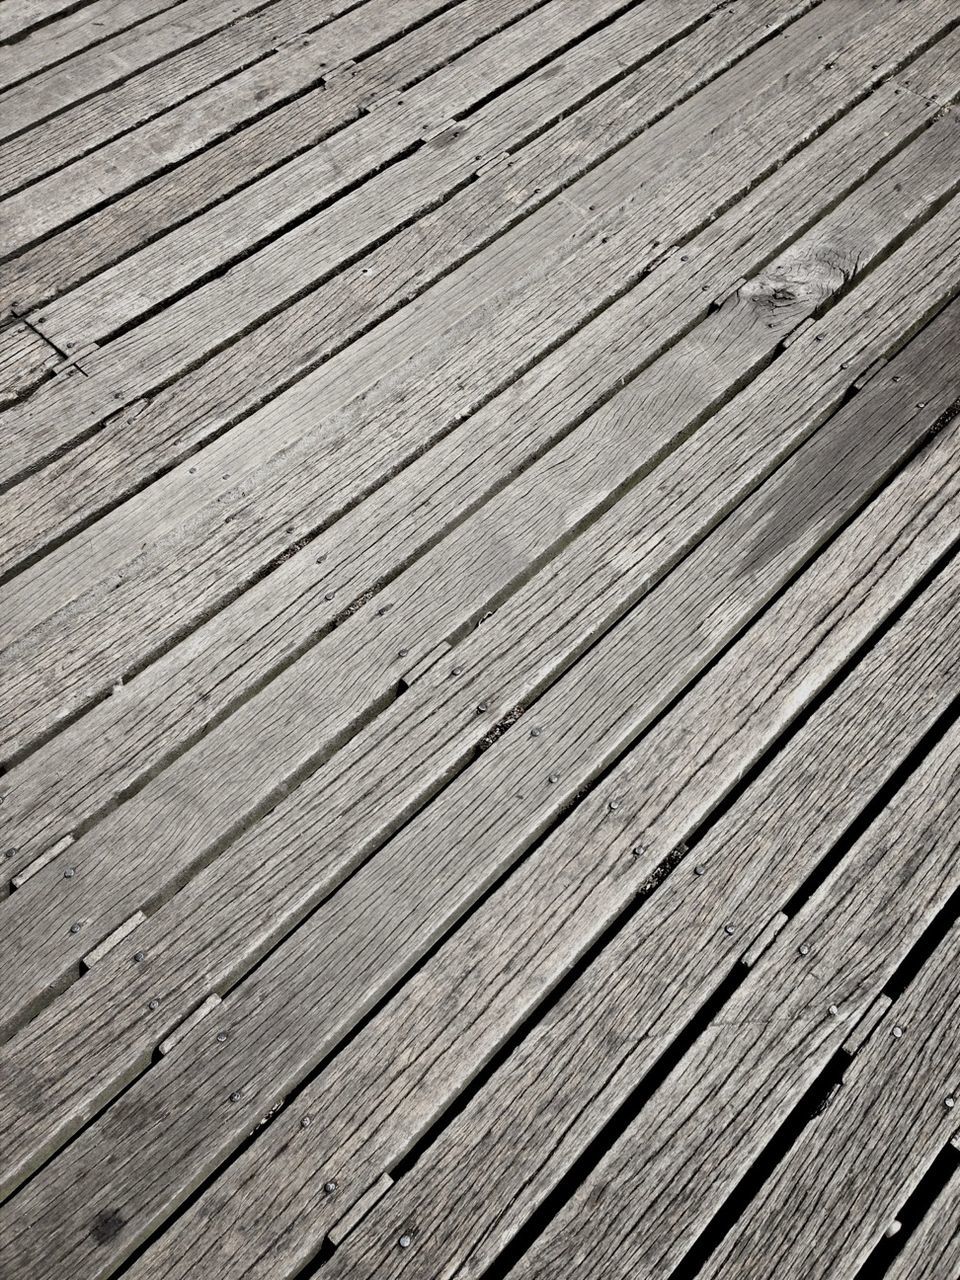 High angle view of wooden pier